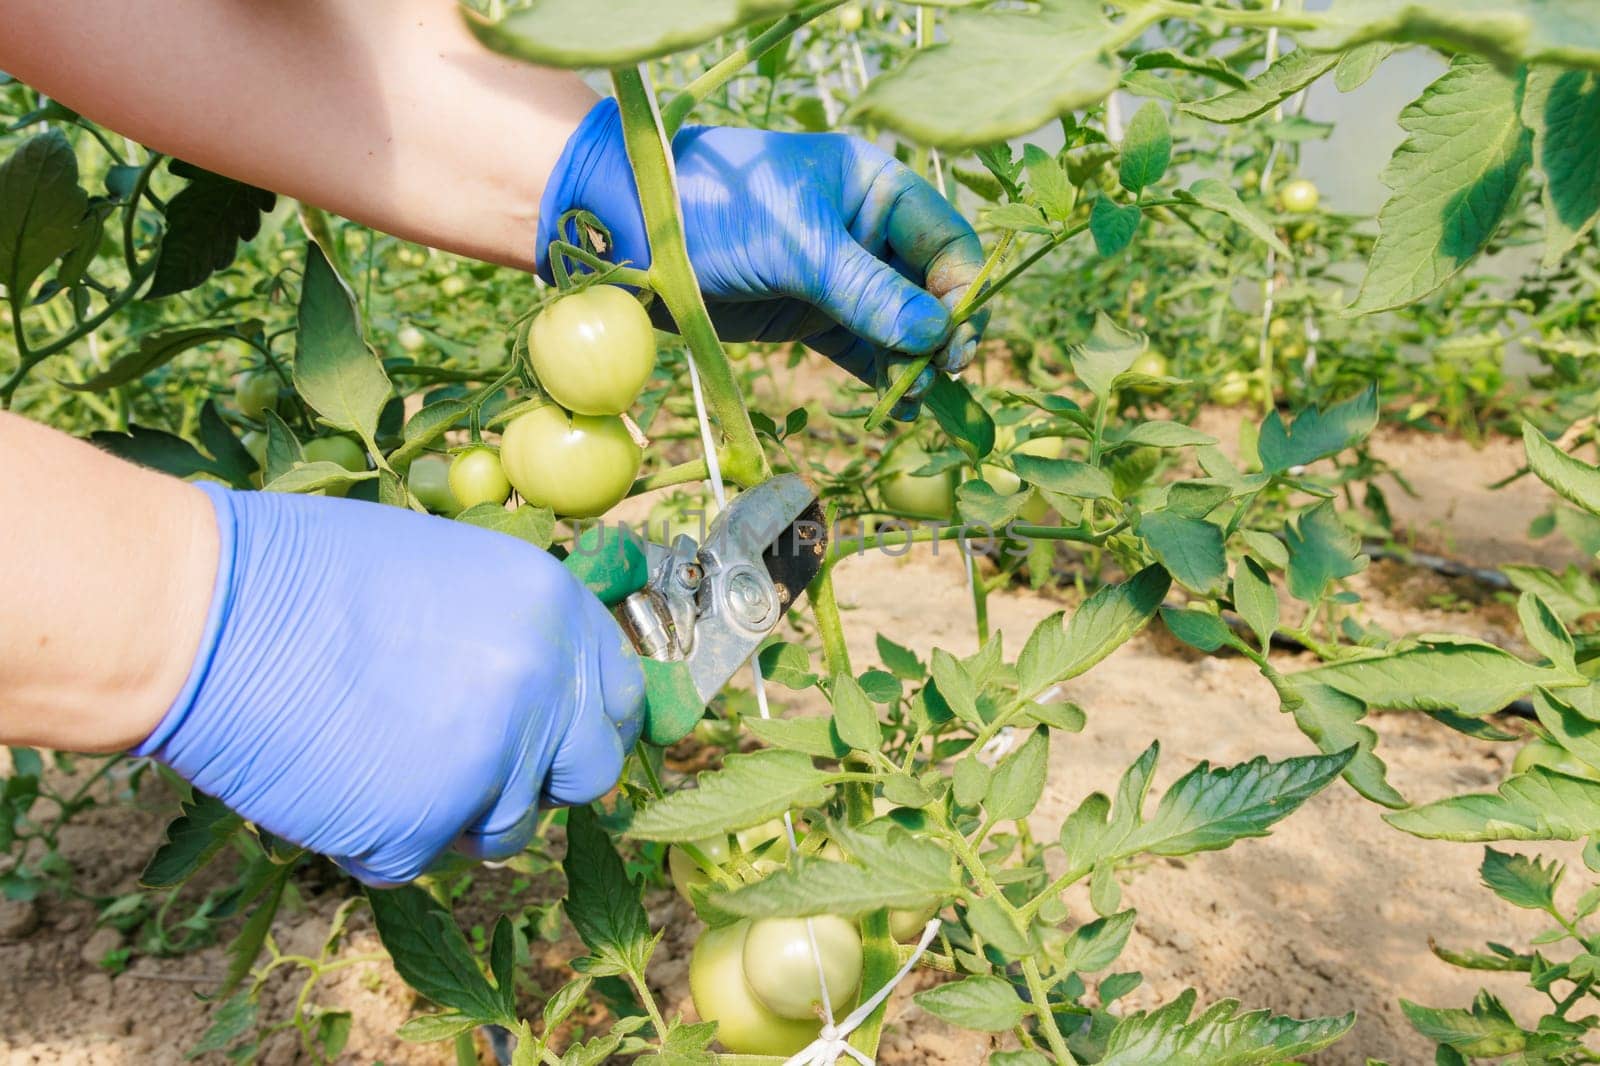 Removing tomato side shoots encourages plant to direct more energy towards fruit production.